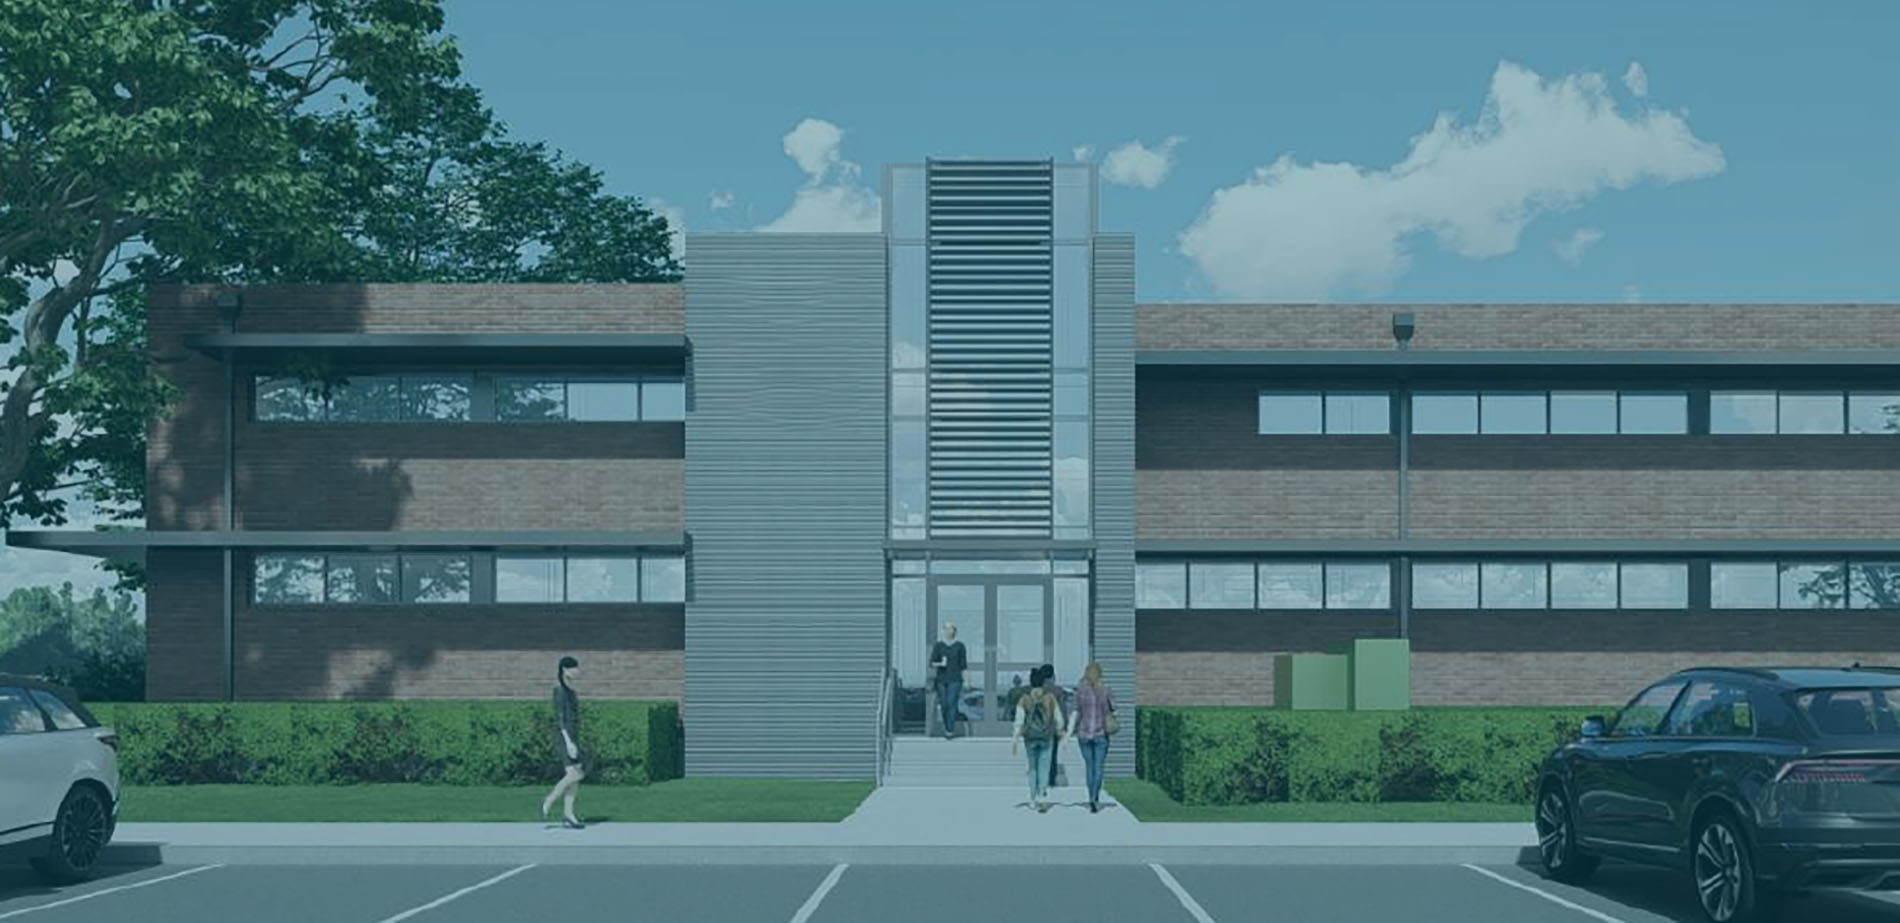 Rendering of the remodeled General Purpose Building on the Windward Campus